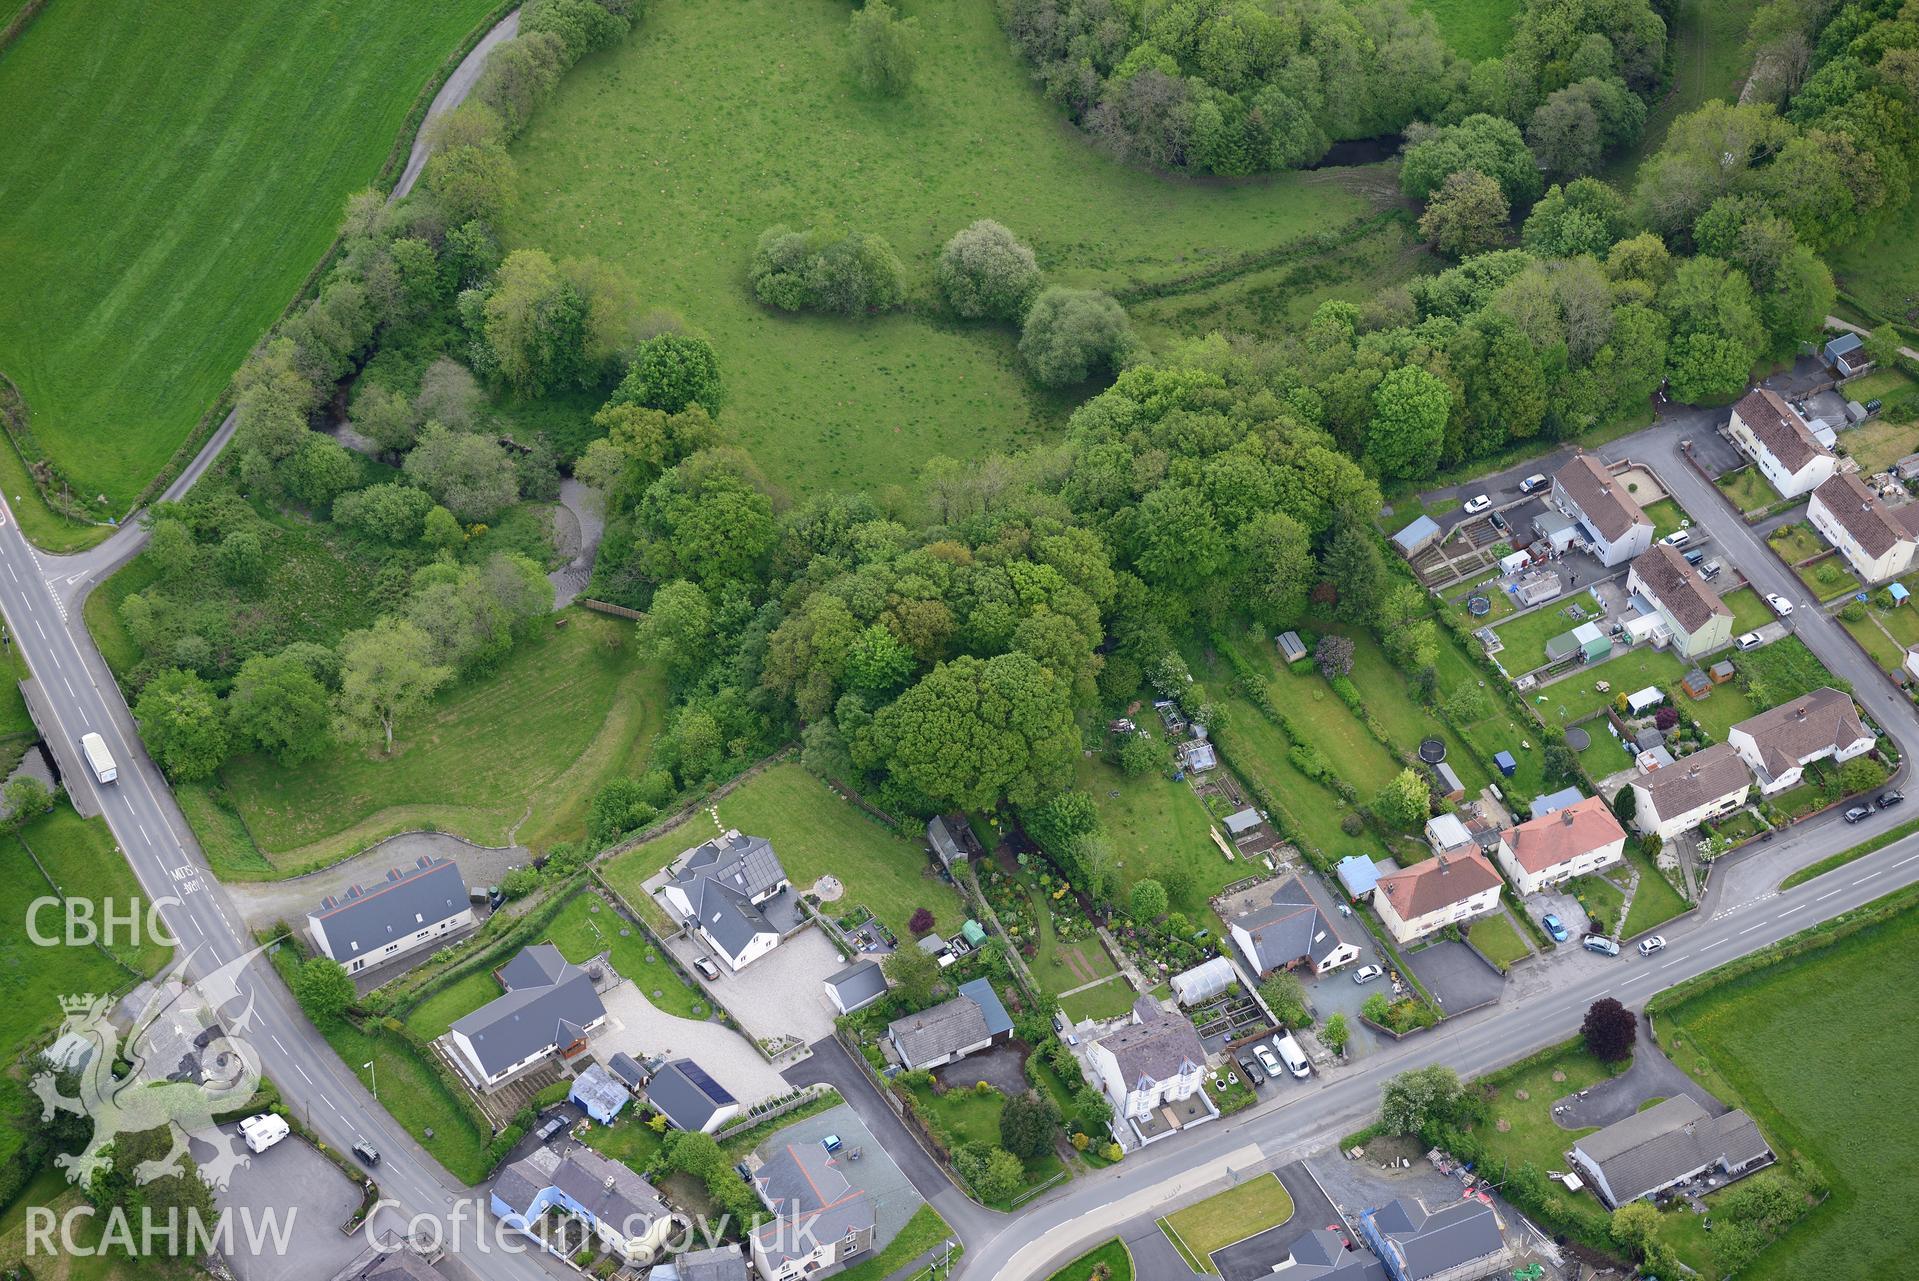 Llanwnnen castle and village. Oblique aerial photograph taken during the Royal Commission's programme of archaeological aerial reconnaissance by Toby Driver on 3rd June 2015.